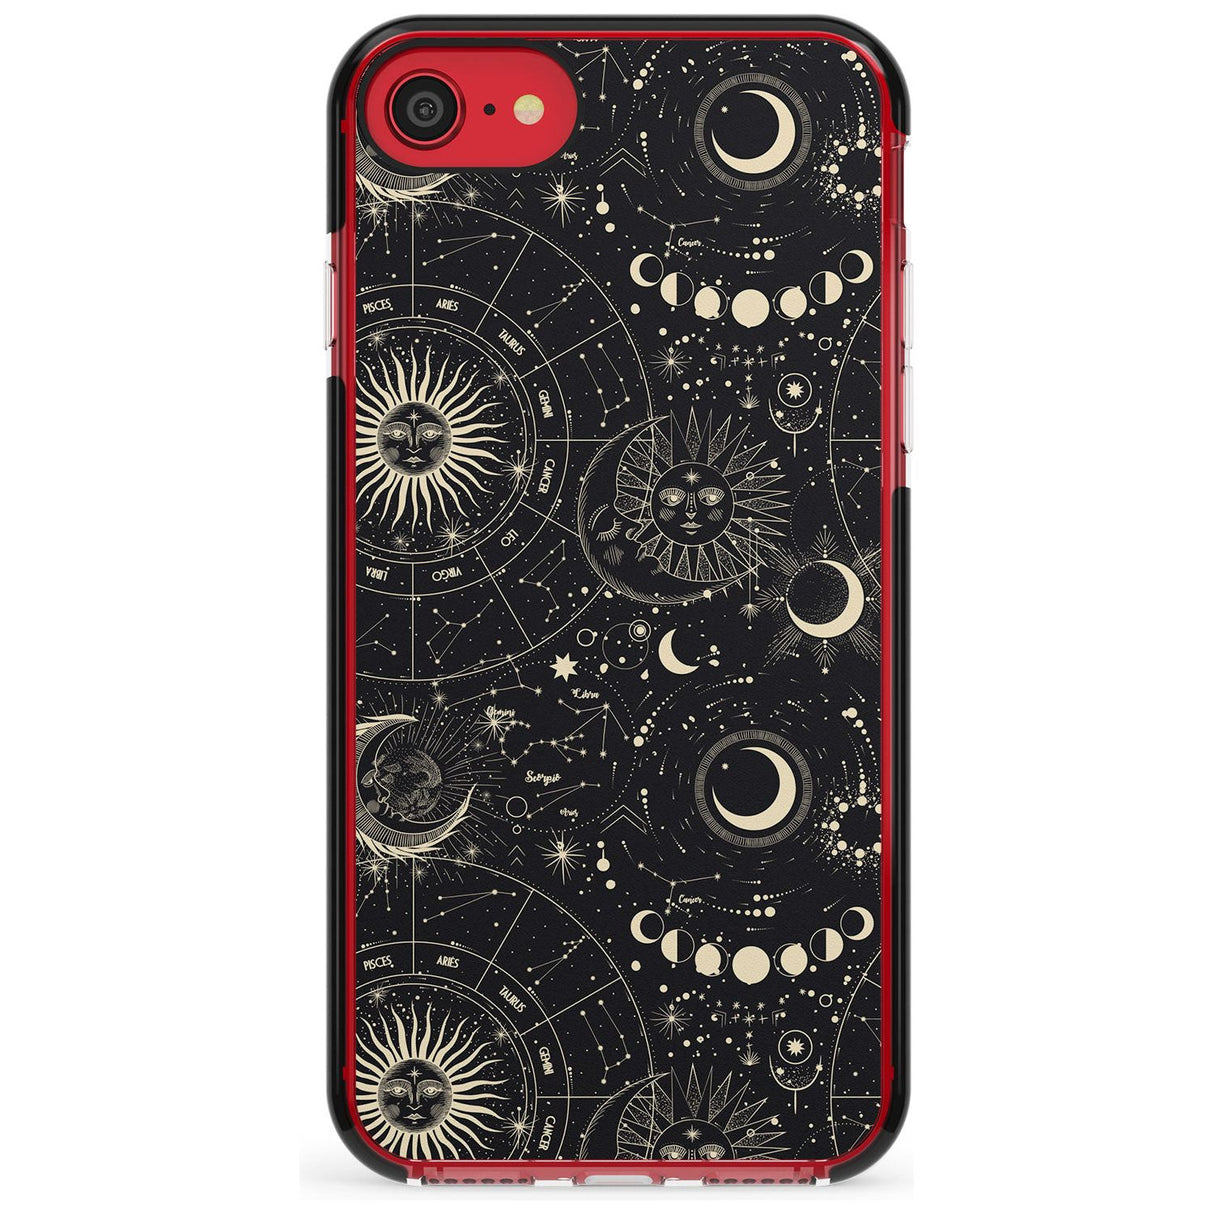 Suns, Moons & Star Signs Pink Fade Impact Phone Case for iPhone SE 8 7 Plus